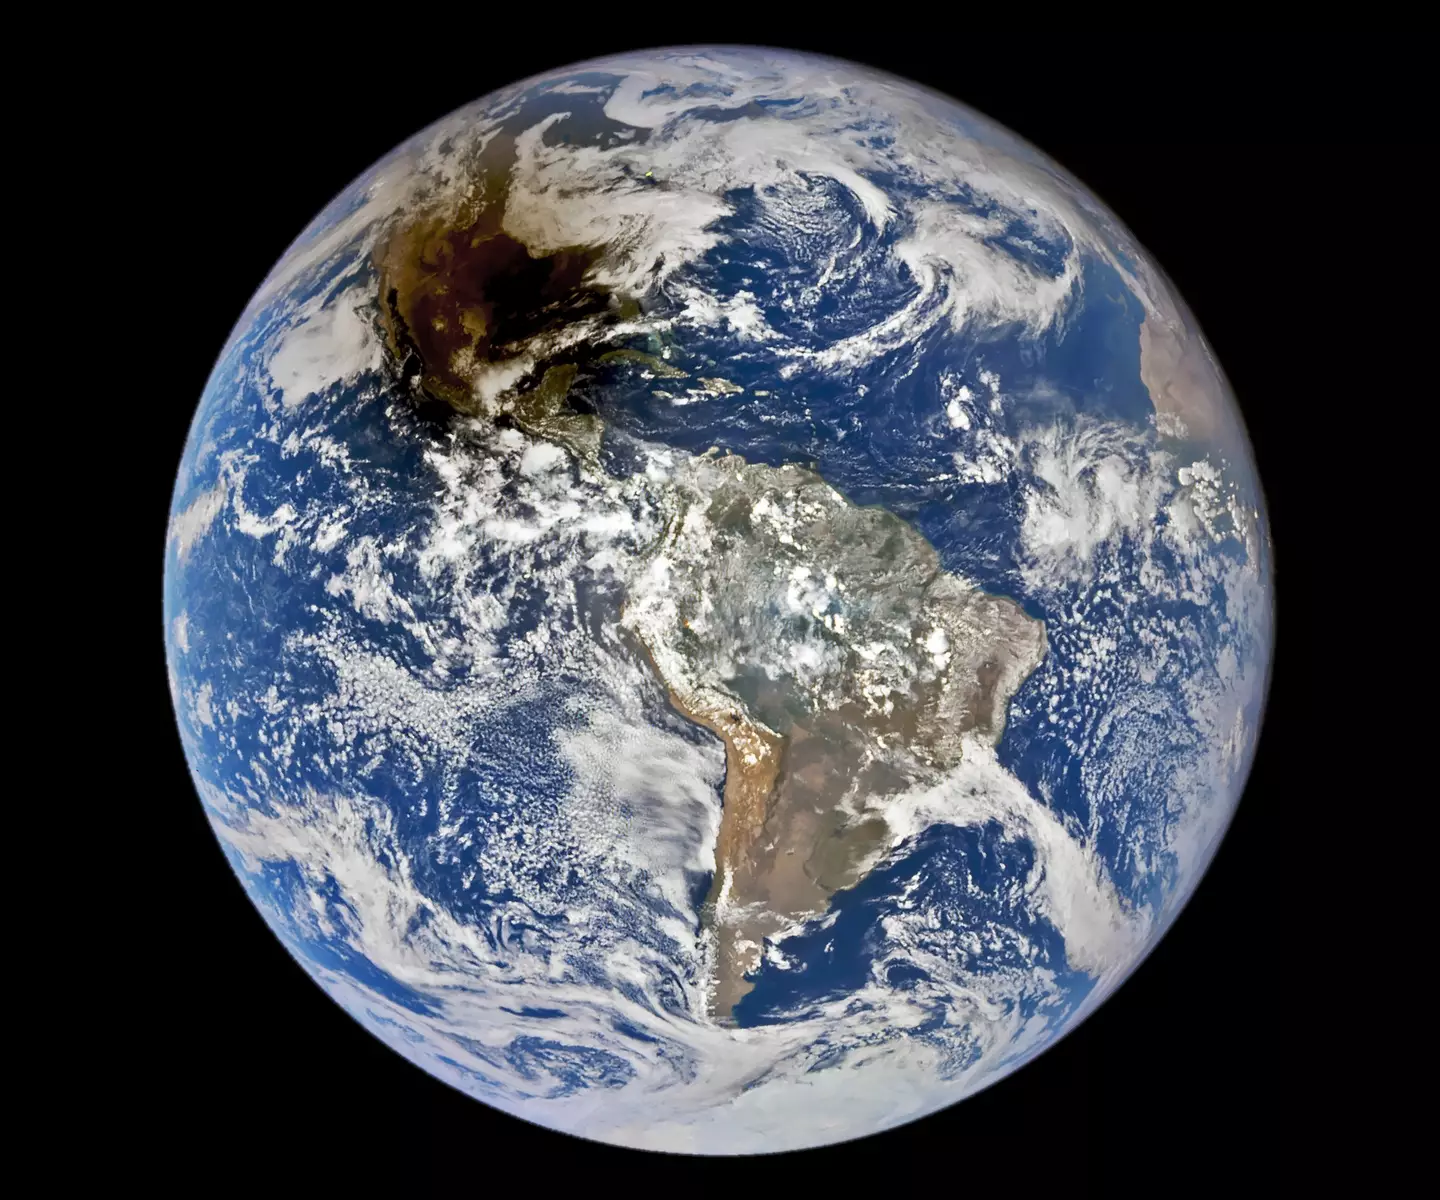 The incredible image of Earth.